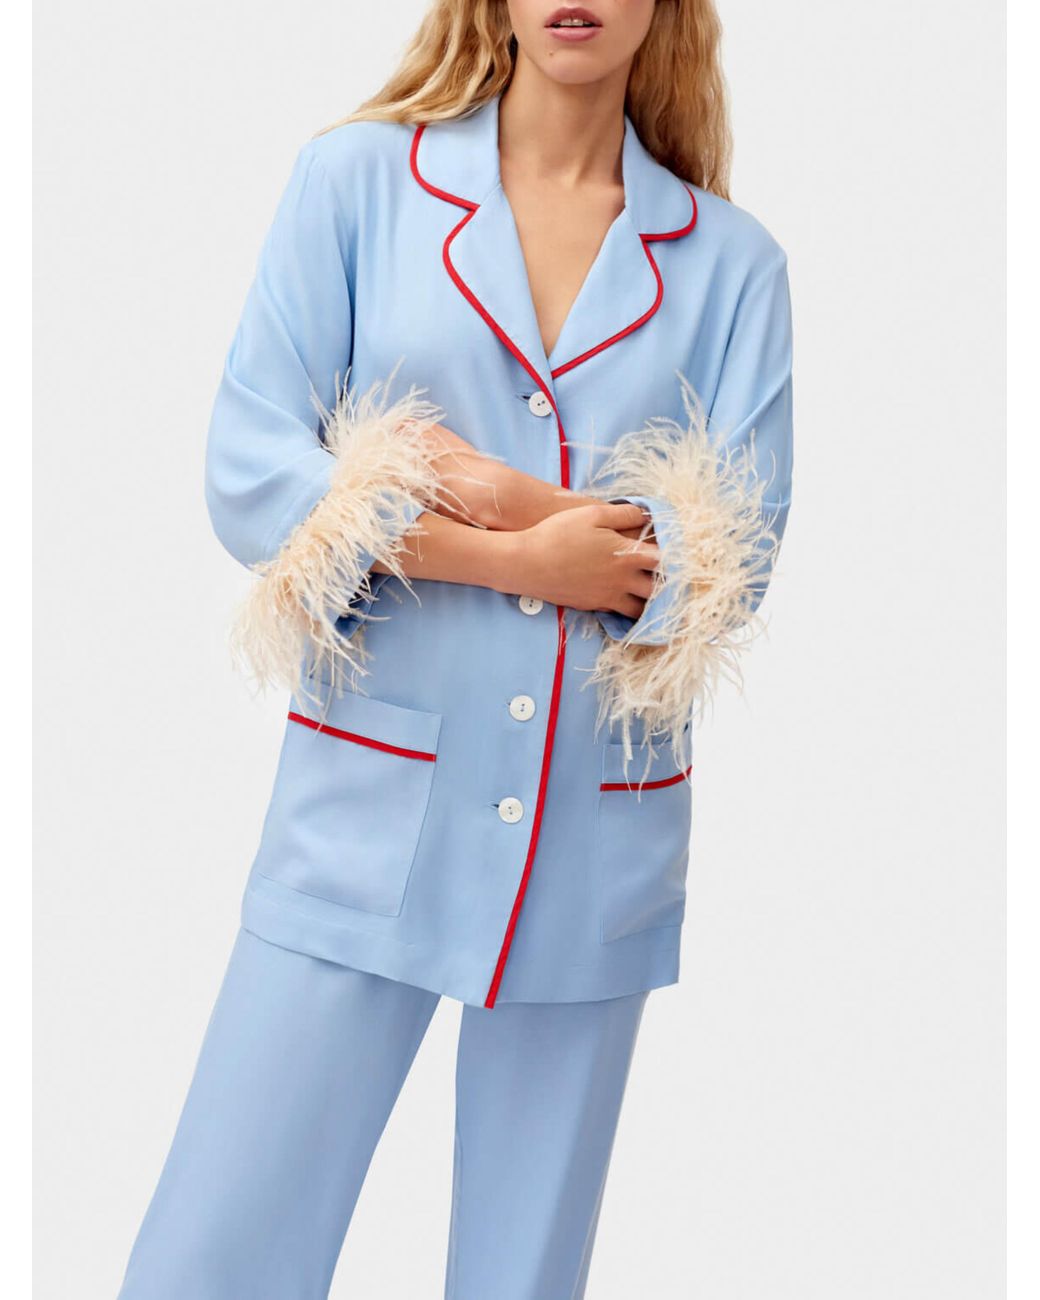 Sleeper Emily In Paris Collab: Blue Party Pajama Set With Beige